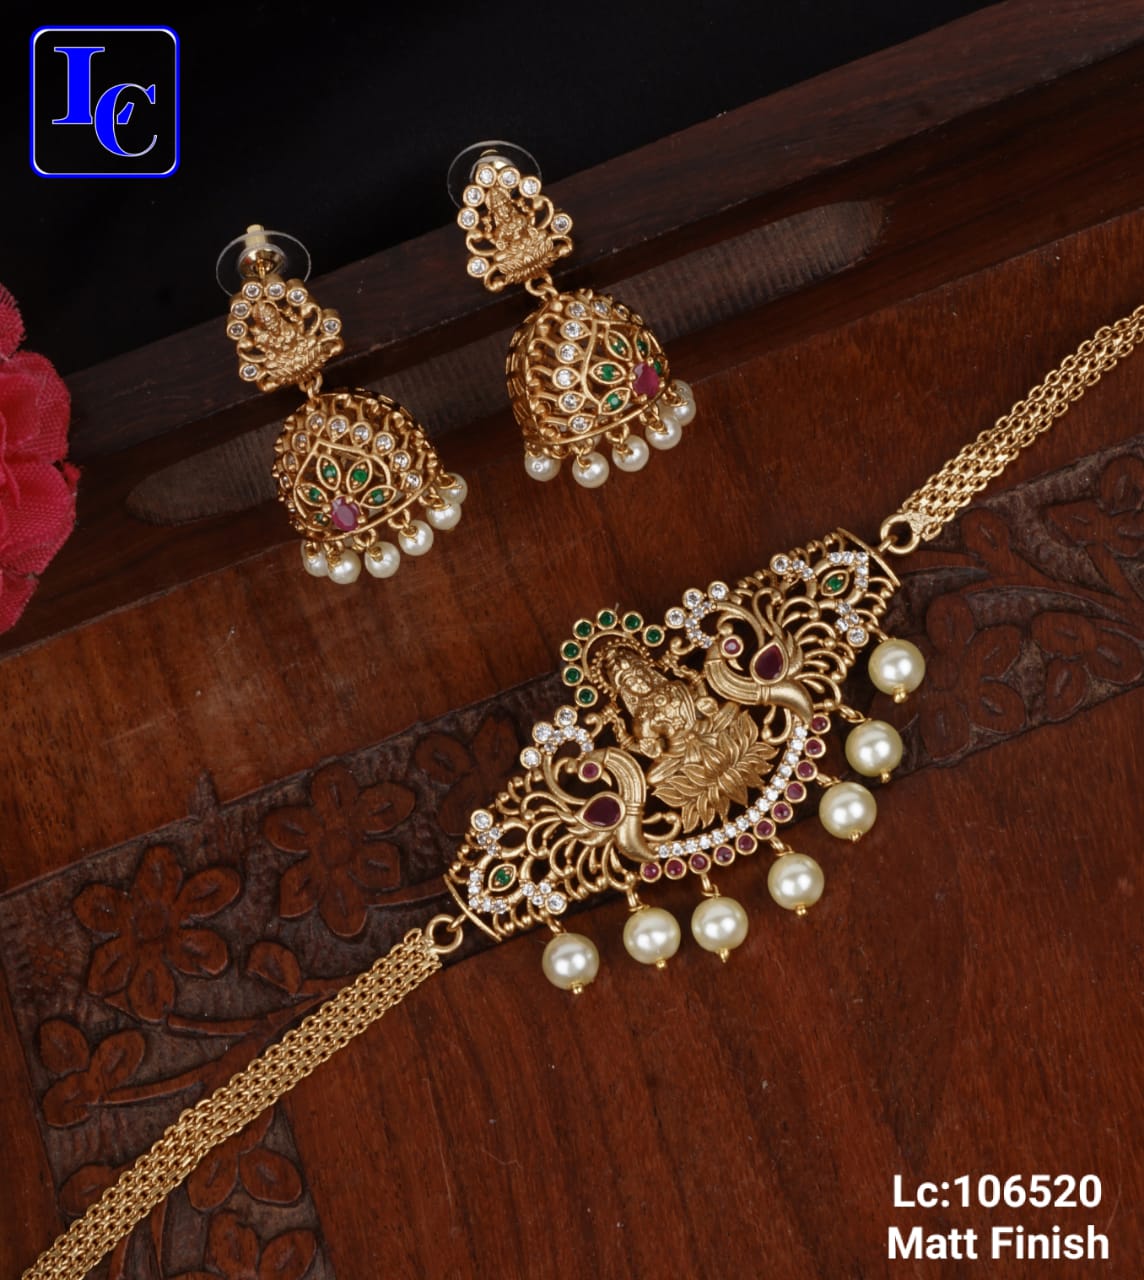 July New Collection Intimate Jewlery 2021 - Indian Jewelry Designs